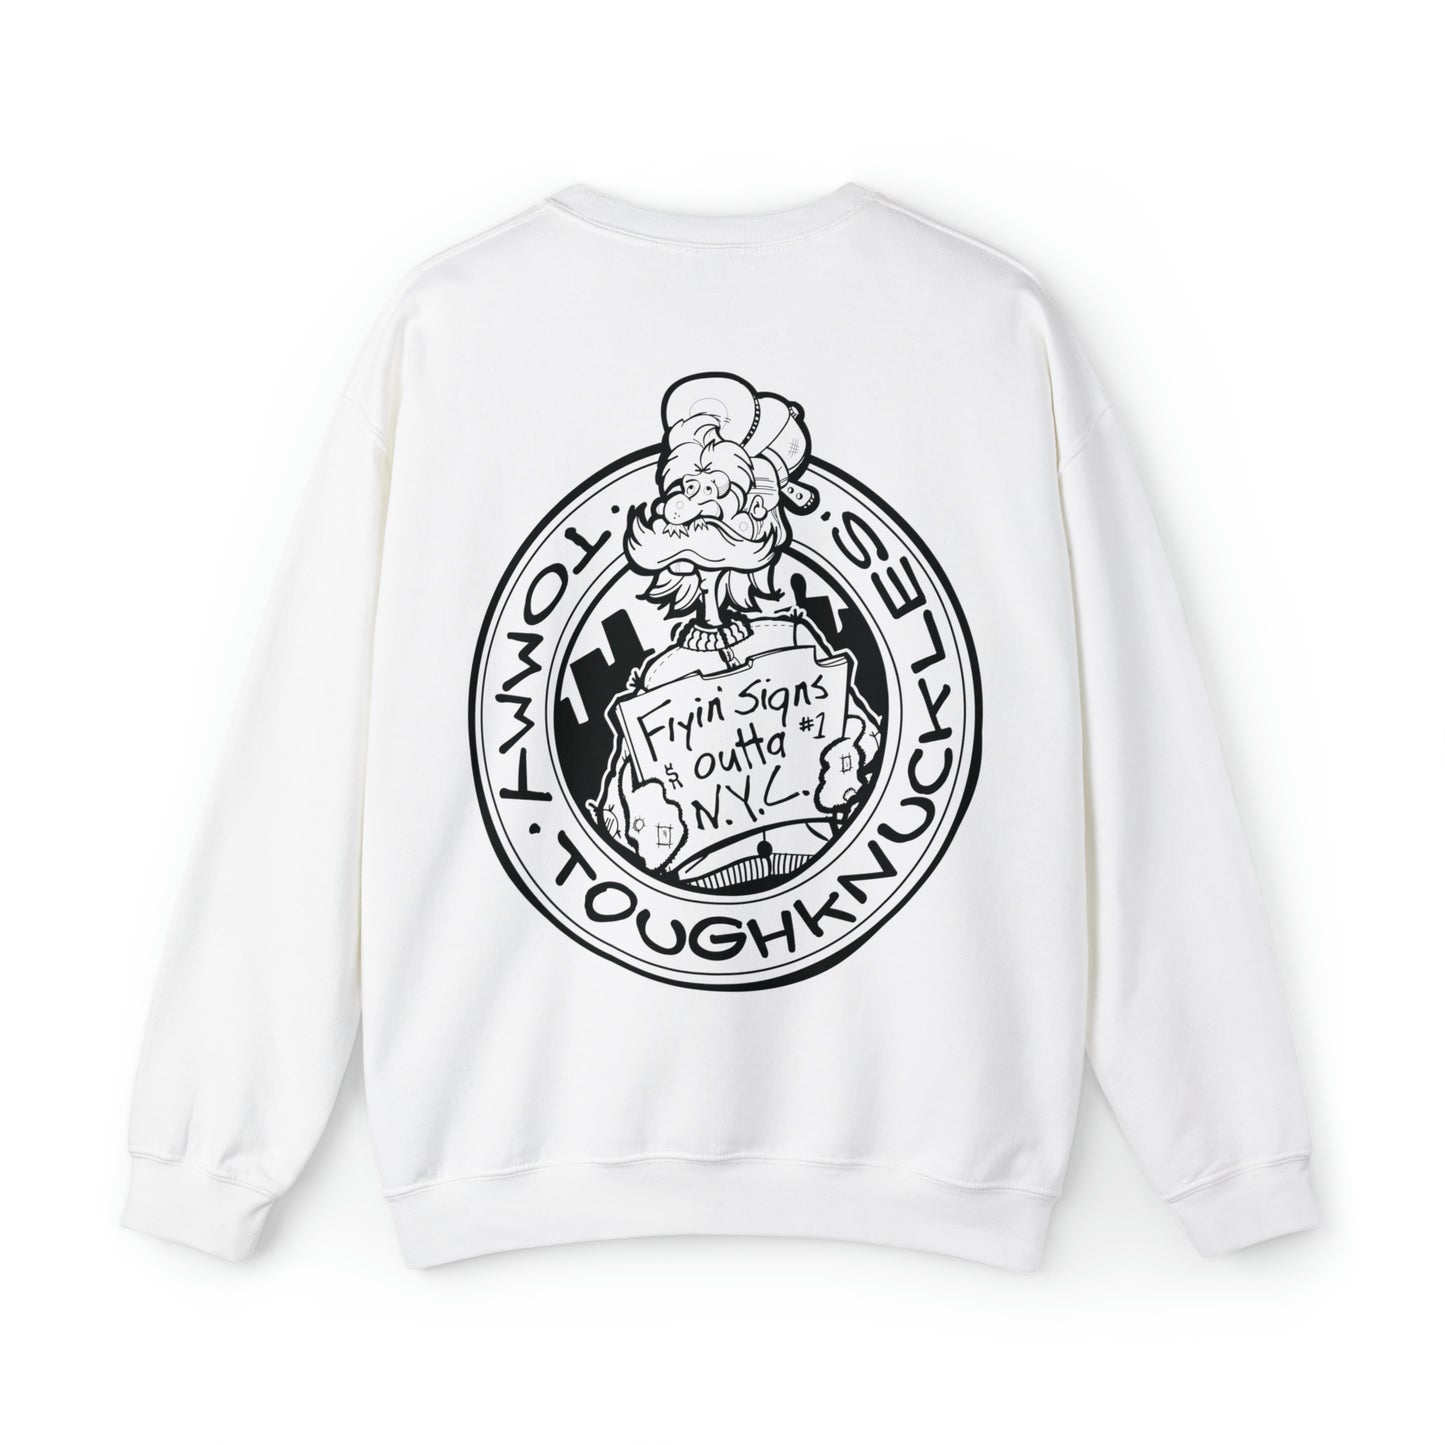 Tommy ToughKnuckles - Crew Neck